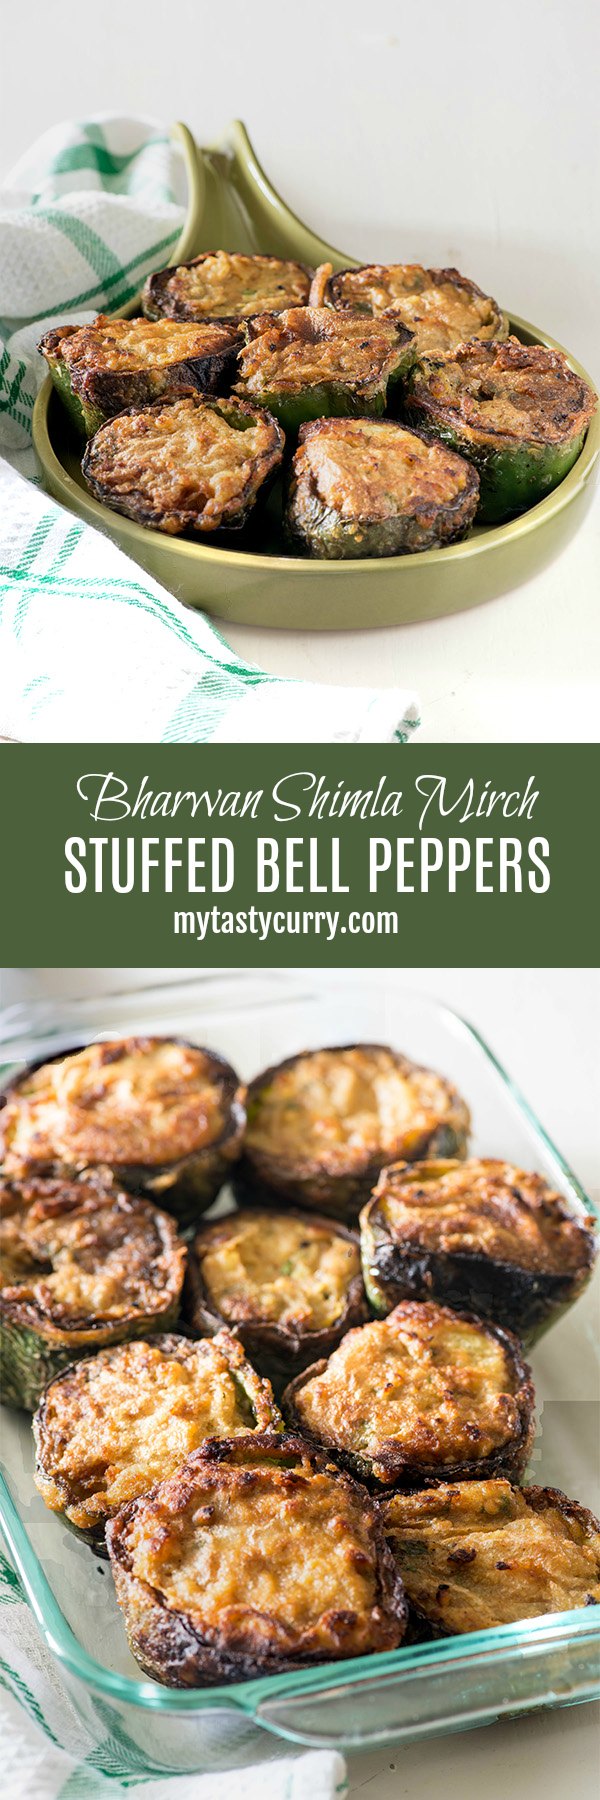 Stuffed Capsicum or Bharwan Shimla mirch Recipe. Punjabi style recipe of stuffed Shimla mirch in which capsicum or bell peppers are stuffed with spicy potato masala filling. Suitable for vegetarians and vegans both.